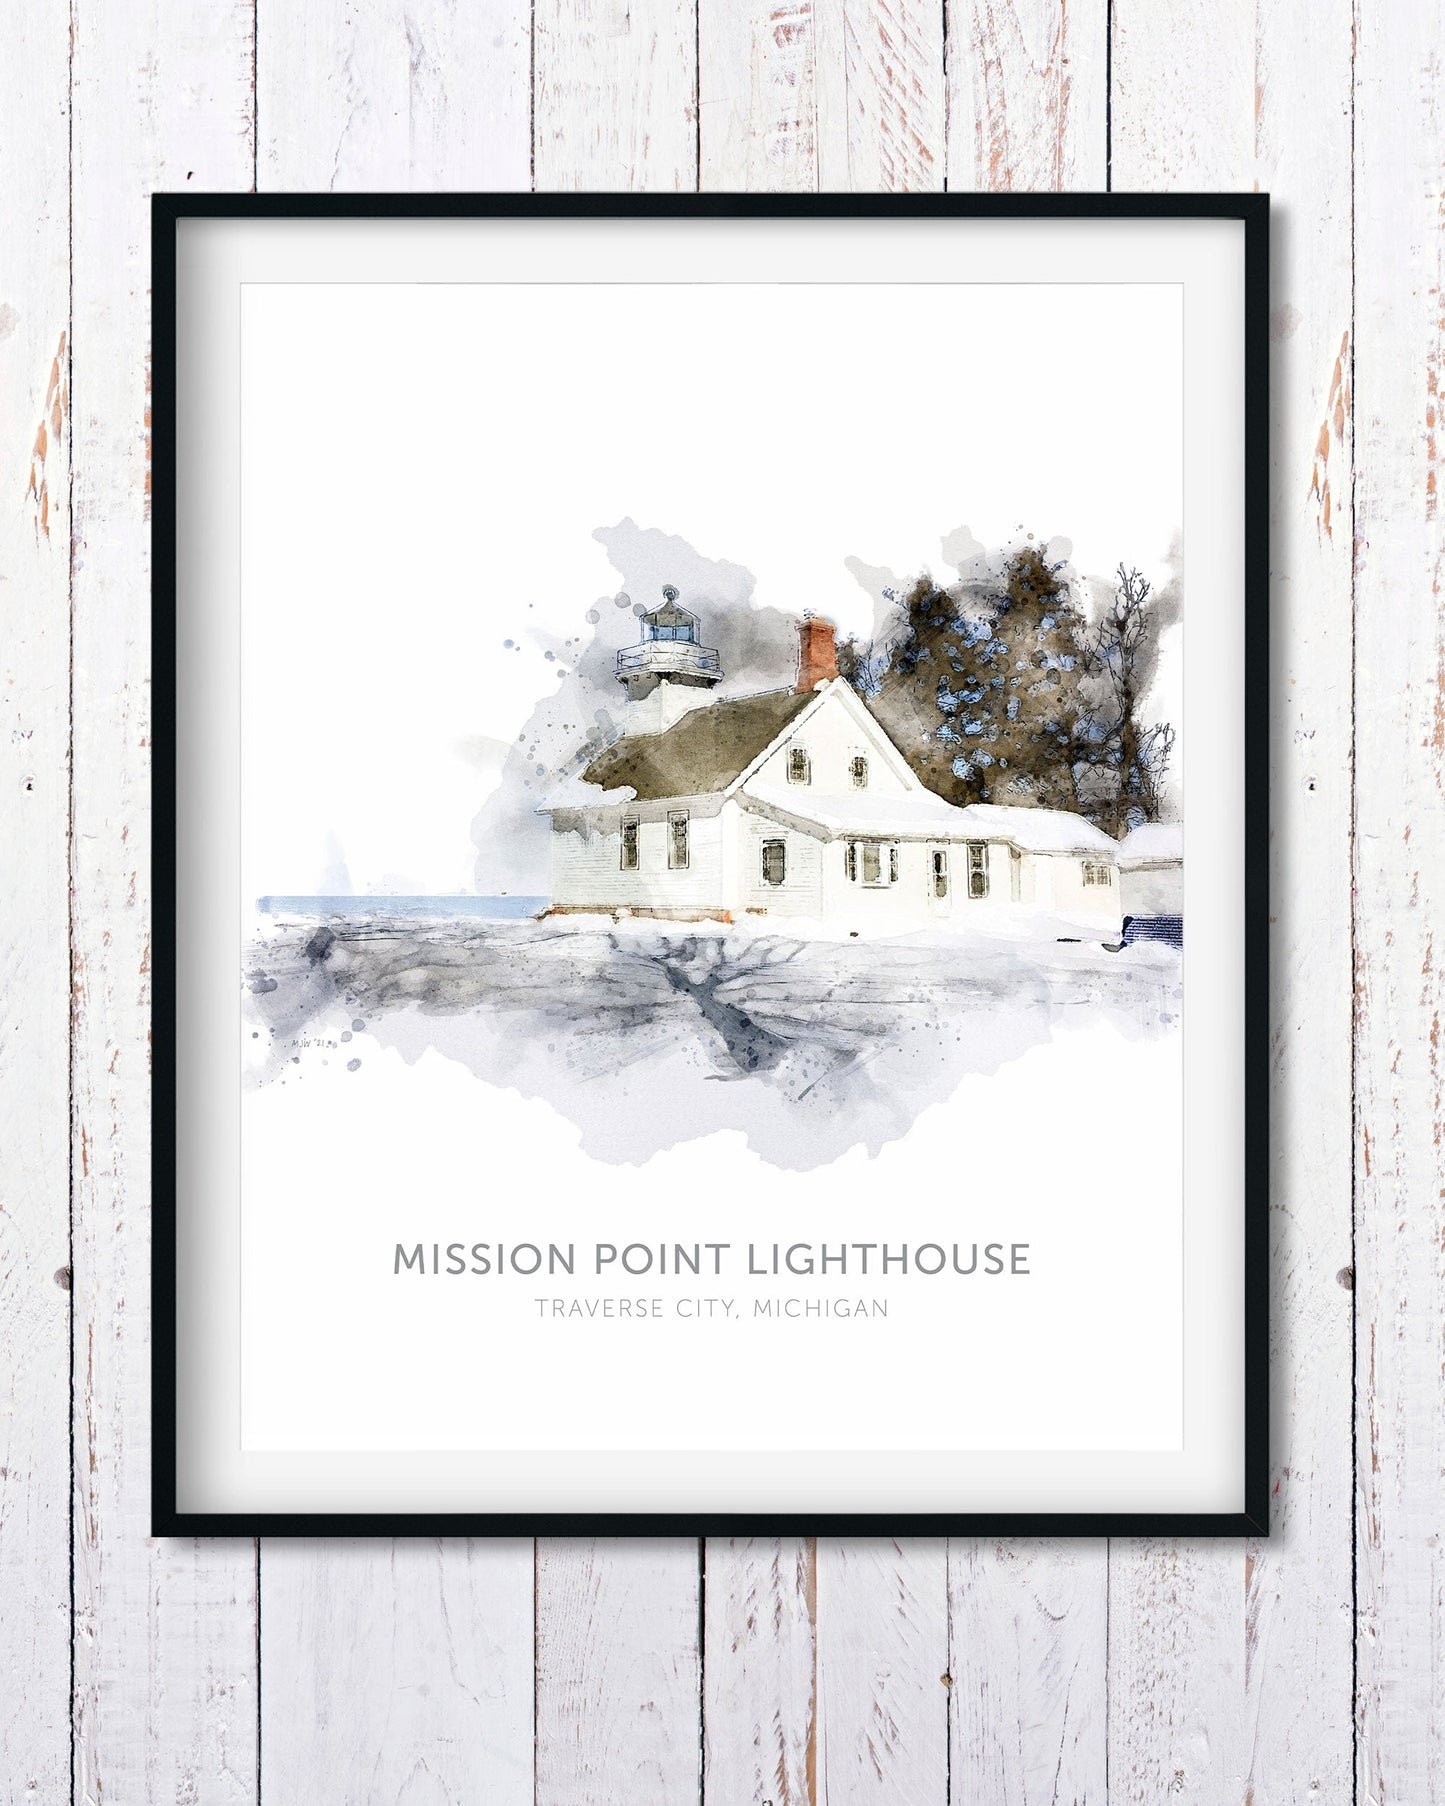 The Old Mission Coloring Book - Old Mission Peninsula Store